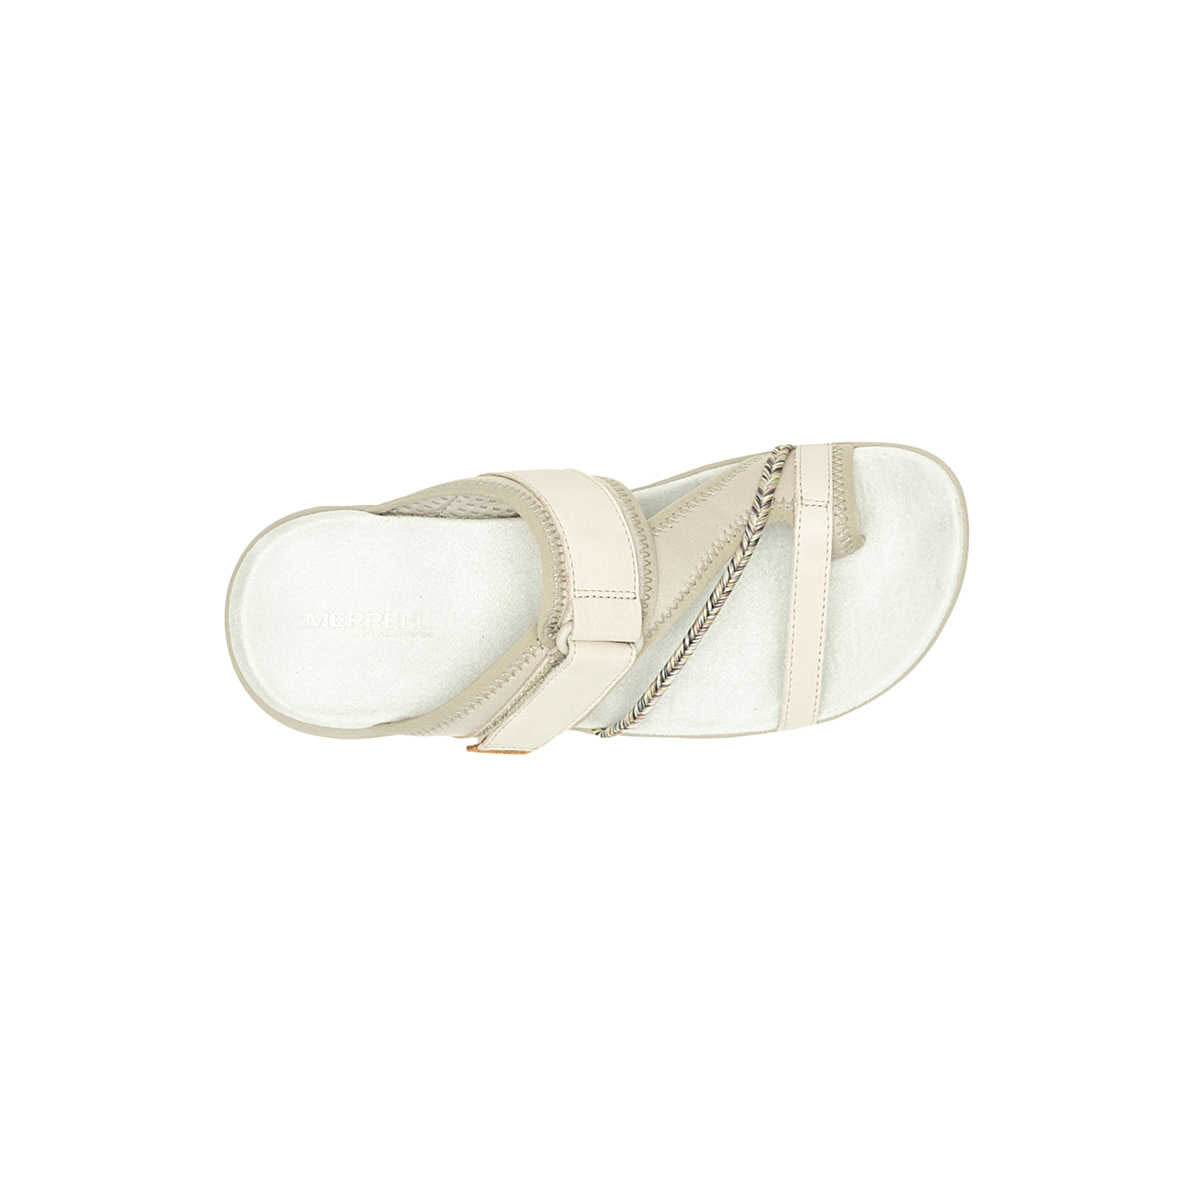 A pair of beige women&#39;s Merrell Terran 4 Slide Incense sandals with a braided detail, adjustable straps, and a buckle closure, viewed from the top on a white background.